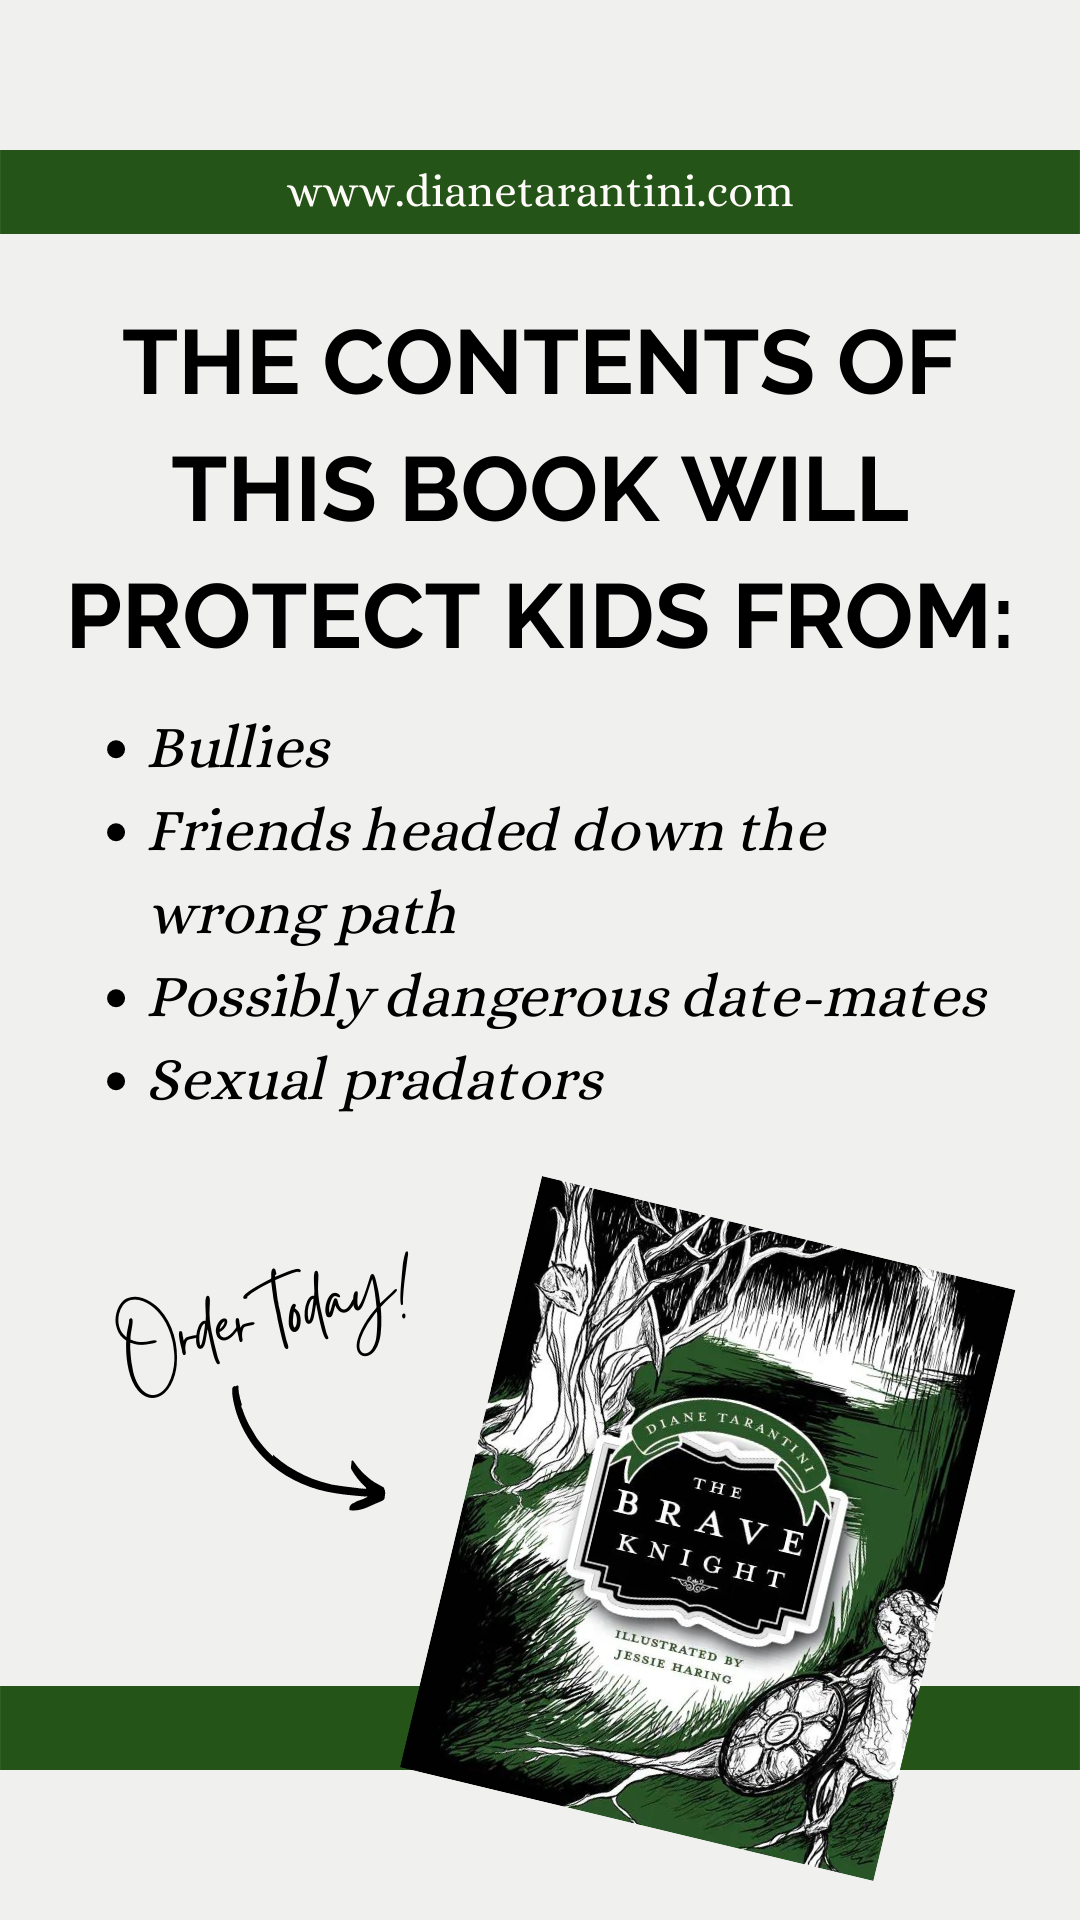 The Book Every Child Needs to Read, "The Brave Knight" by Diane Tarantini